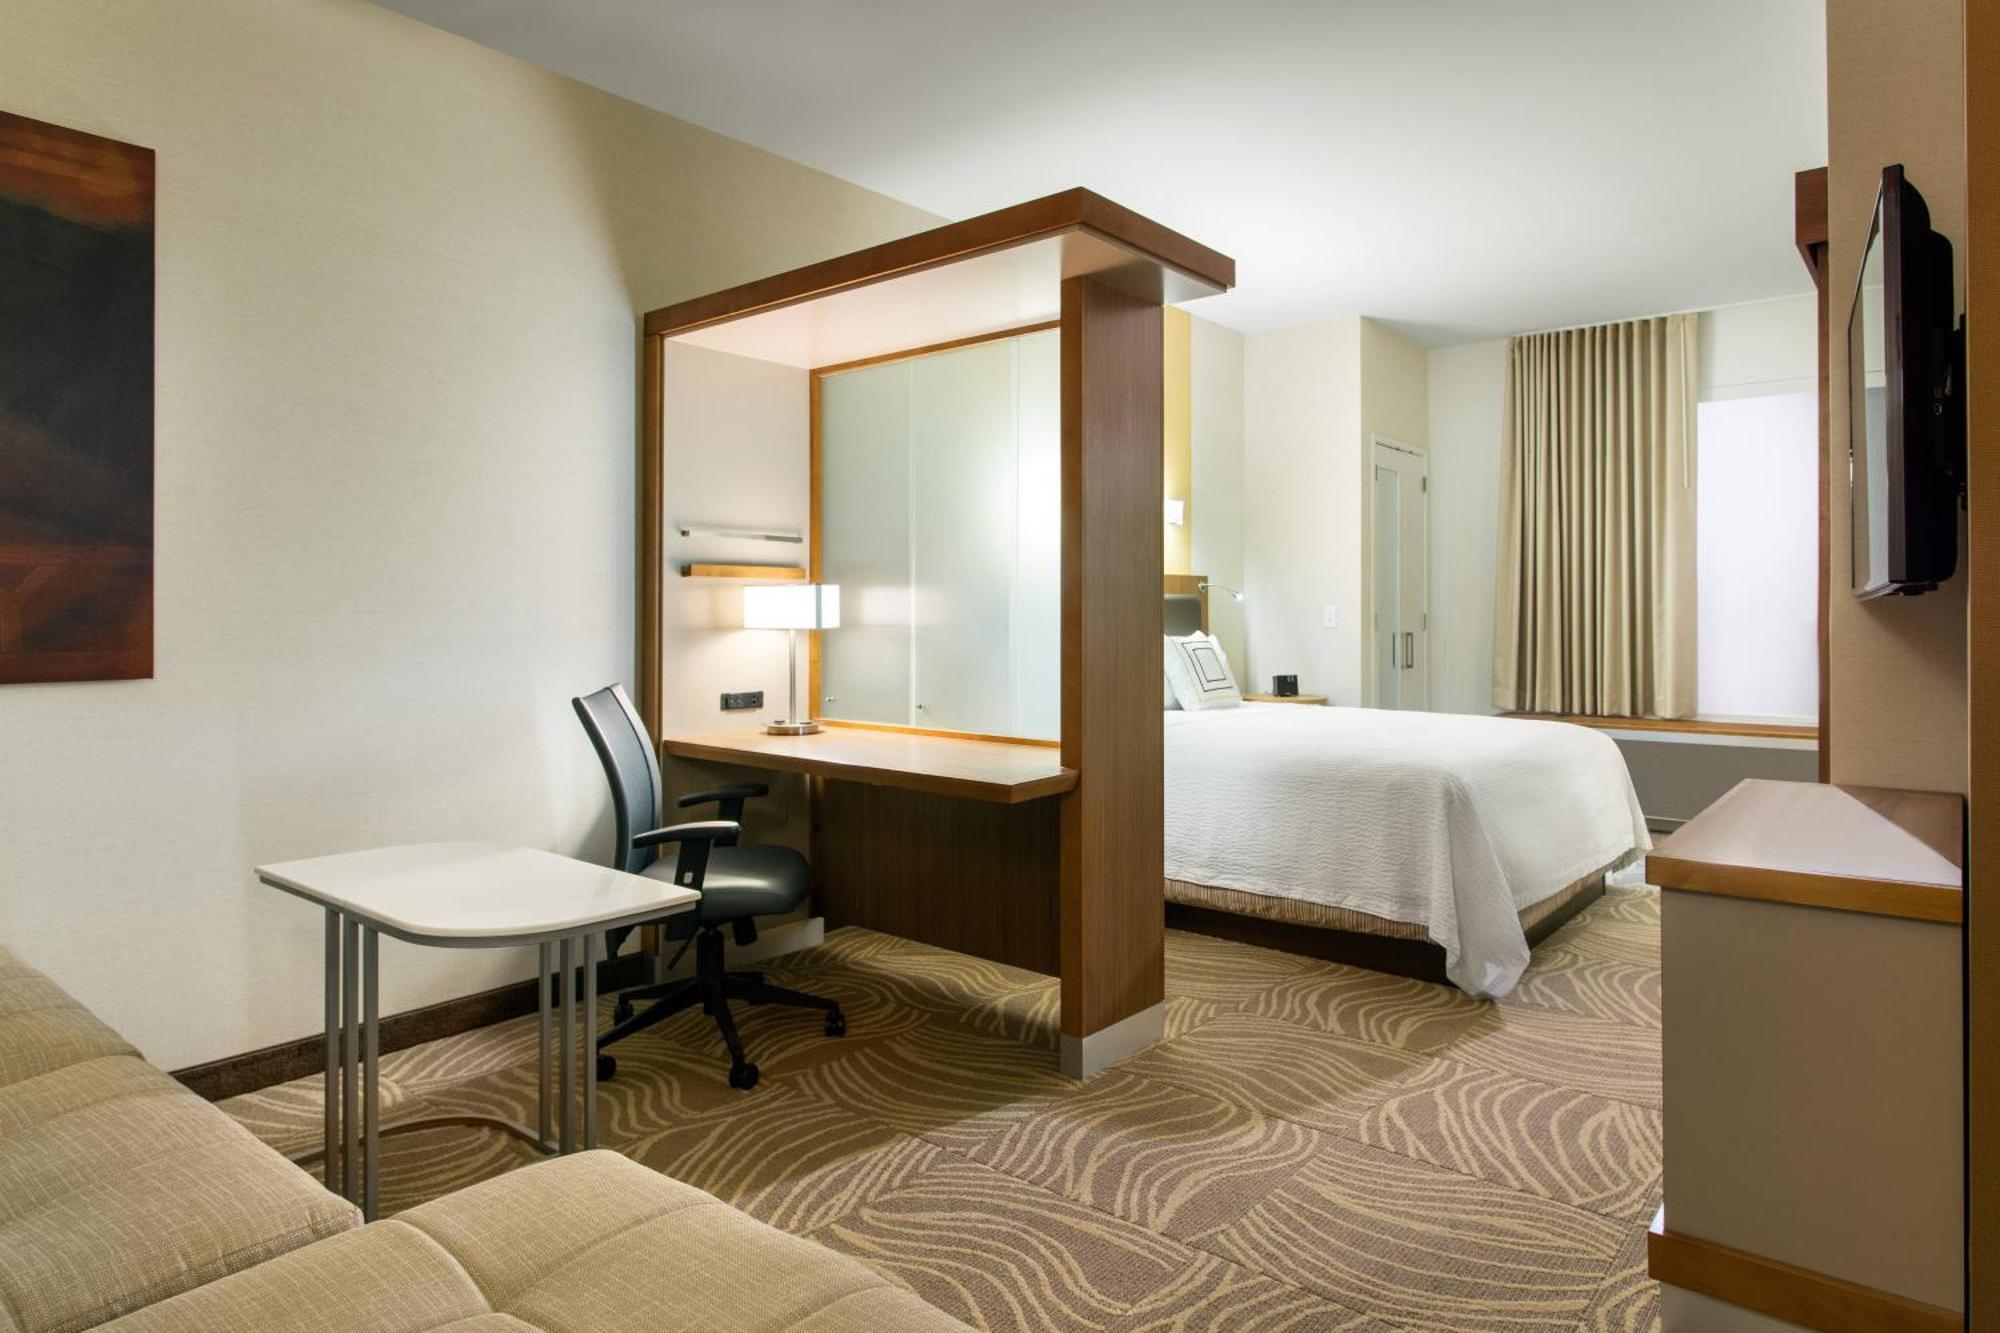 Springhill Suites By Marriott Los Angeles Burbank/Downtown Экстерьер фото